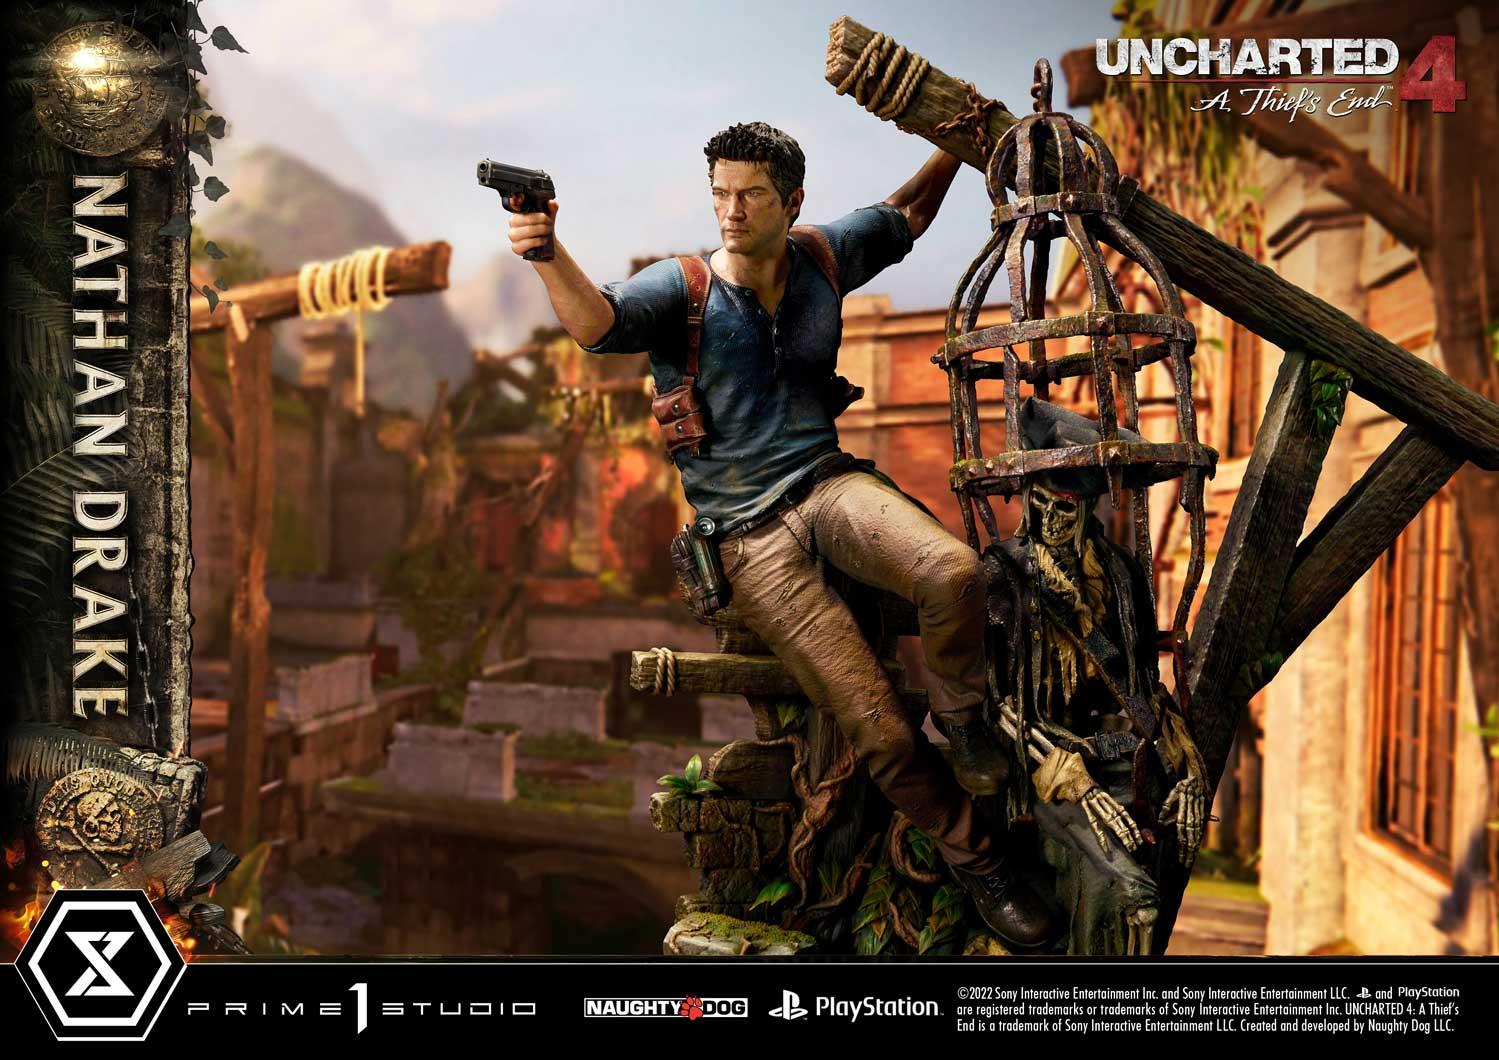 Uncharted 4: A Thief's End Nathan Drake DX Statue by Prime 1 Studio